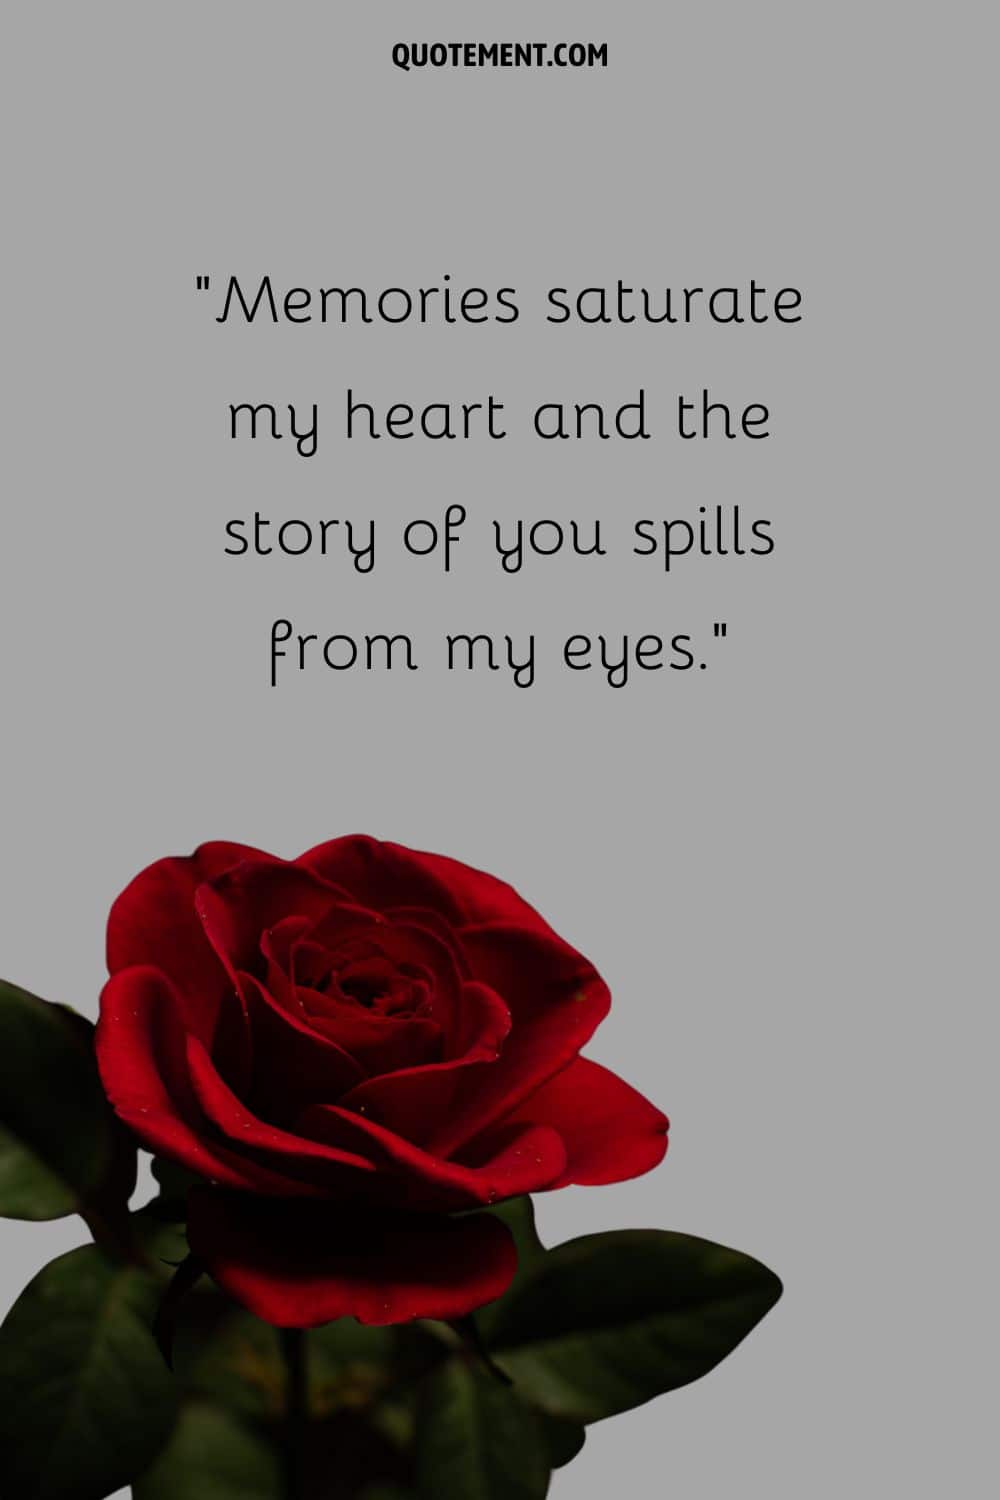 Image of a red flower representing a quote to remember a loved one.